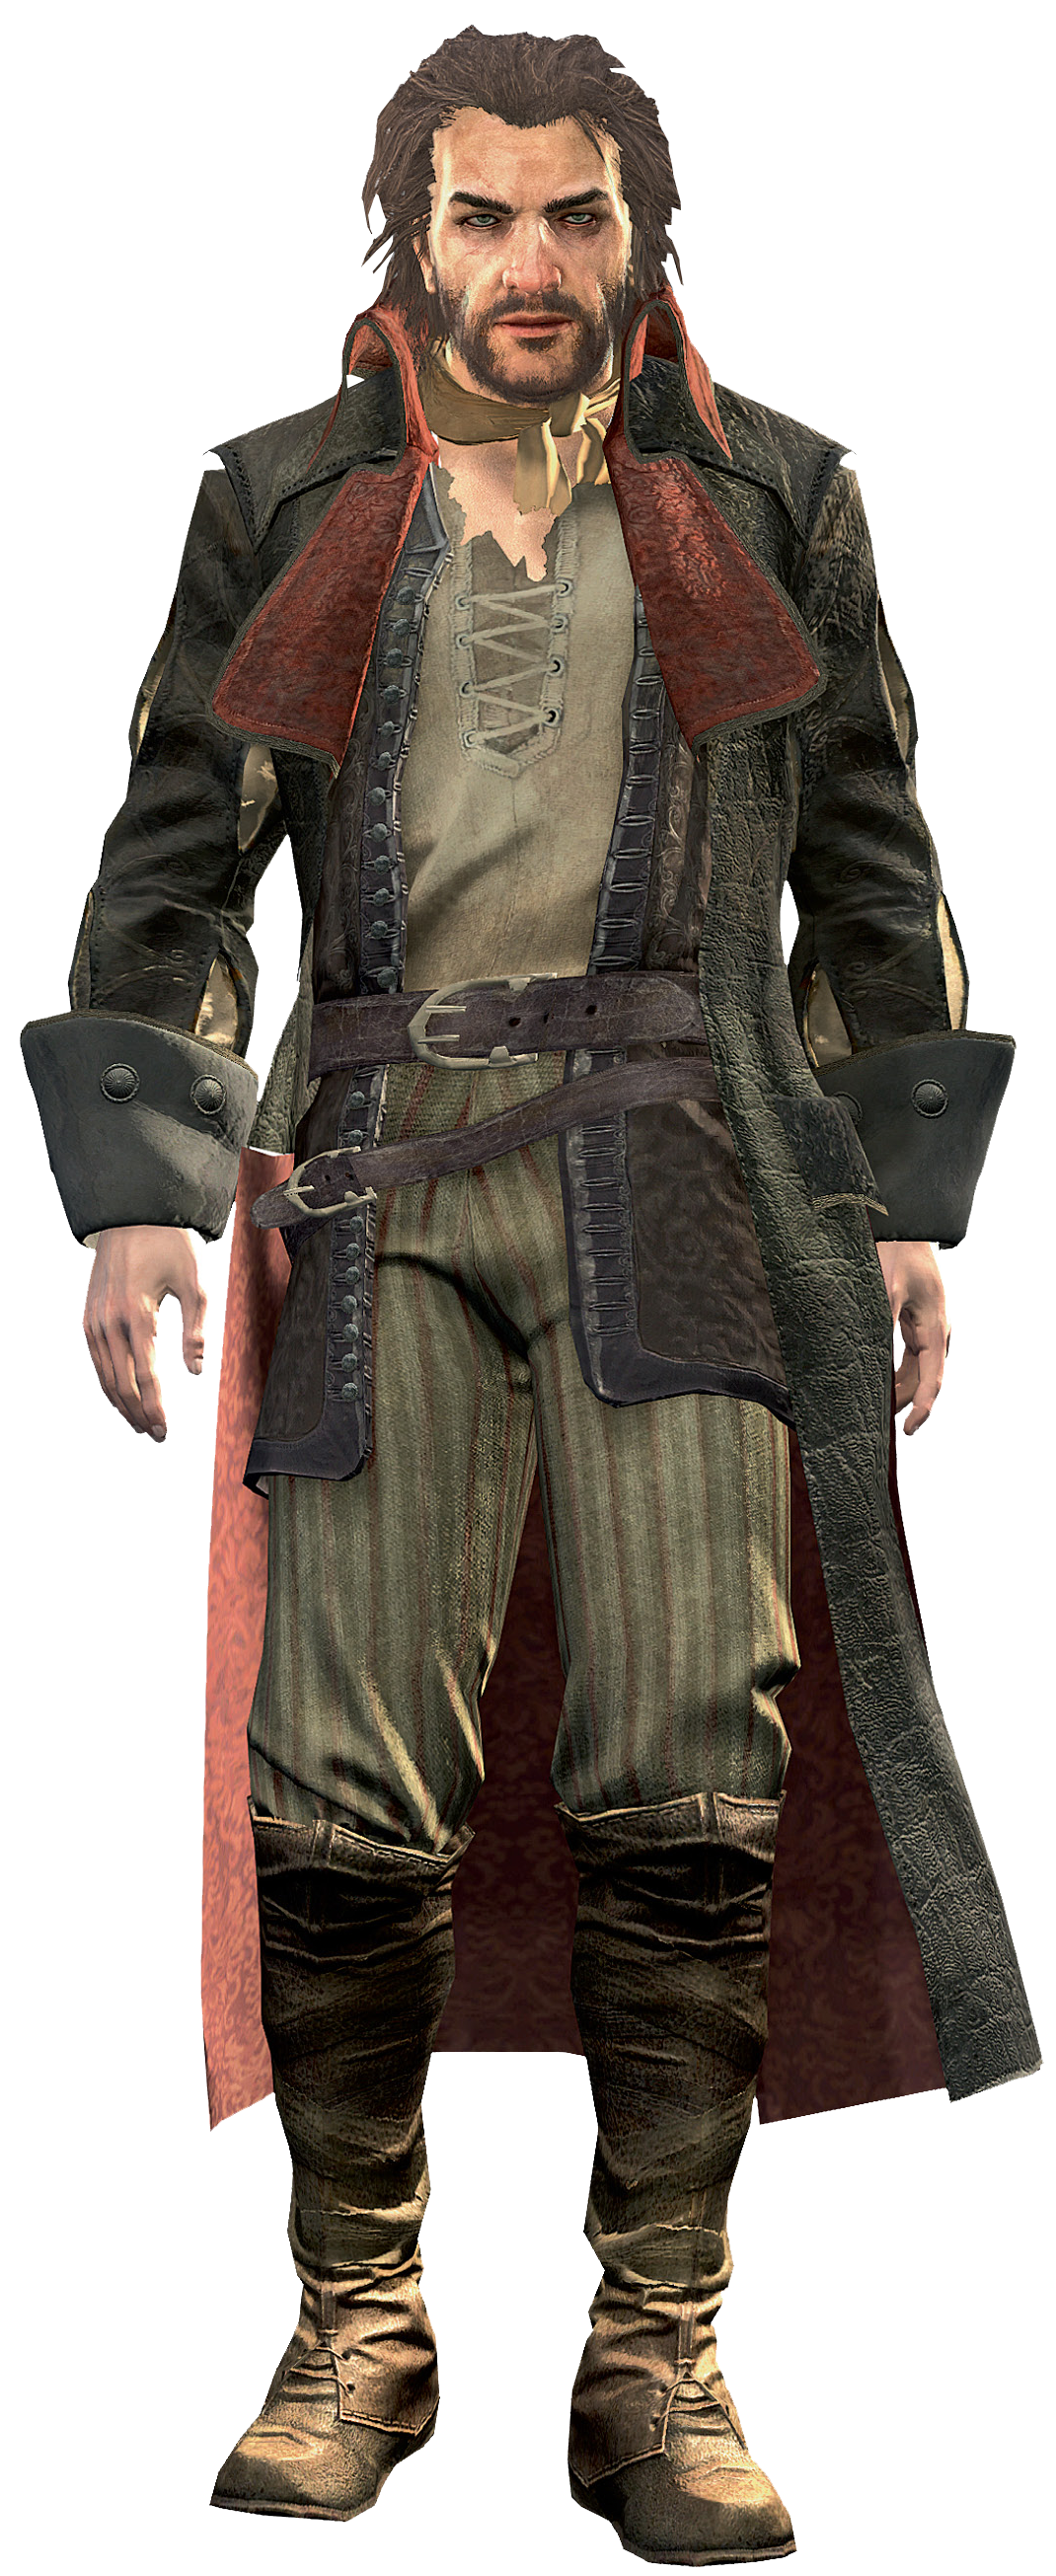 http://img4.wikia.nocookie.net/__cb20131126121301/assassinscreed/images/6/6b/AC4_Charles_Vane_render.png